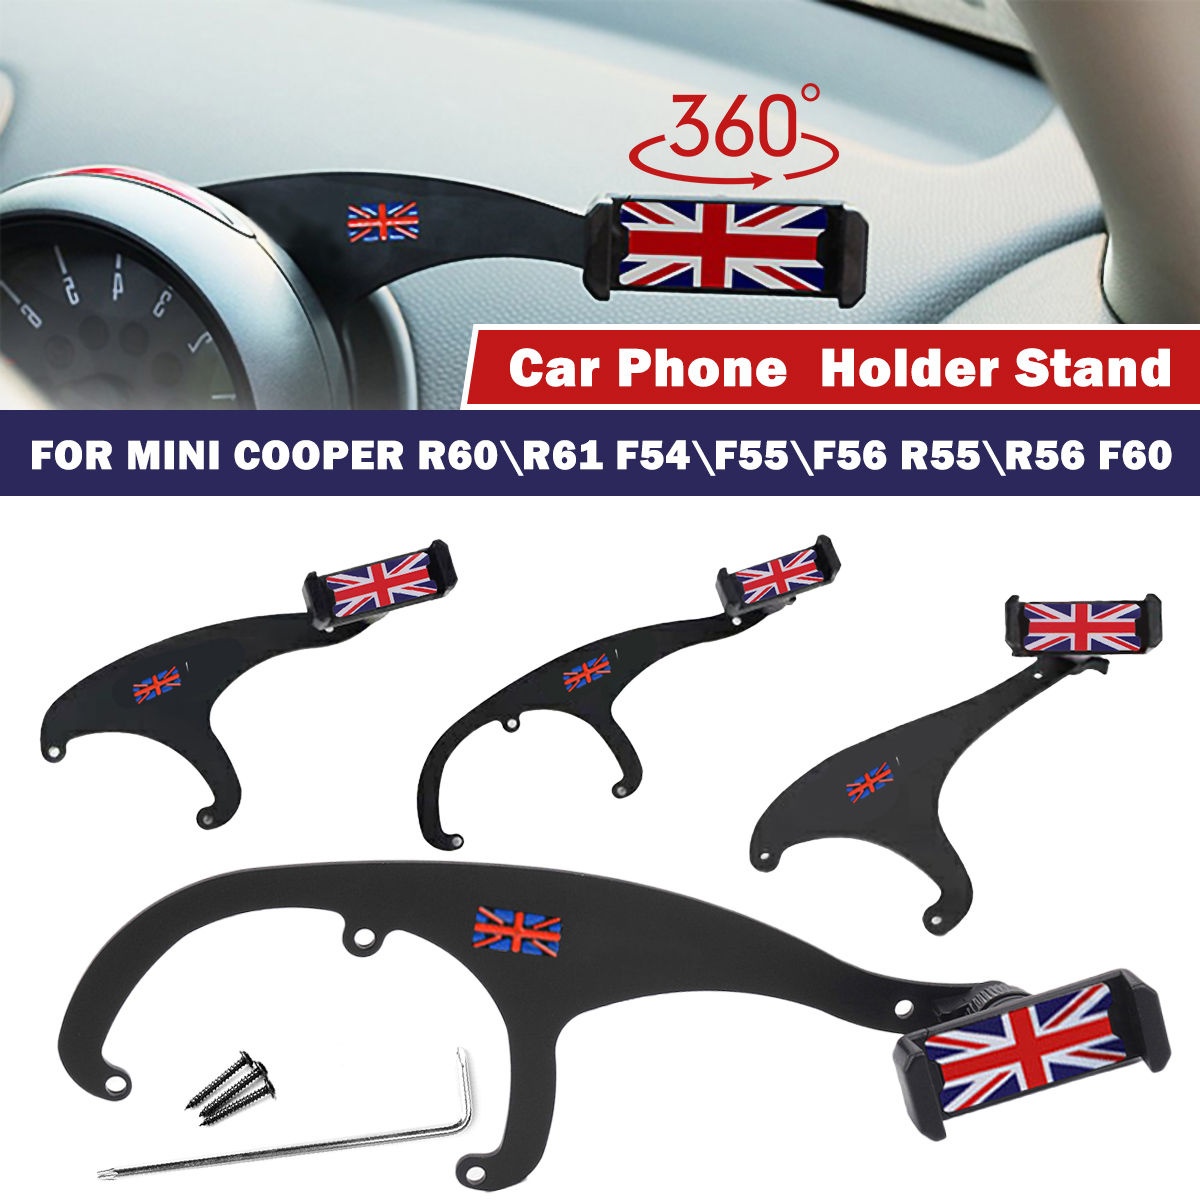 Bakeey-360deg-Rotation-Car-Phone-Mount-Cradle-Holder-Stand-for-Mini-Cooper-R60R61-F54F55F56-R55R56-F-1633190-1